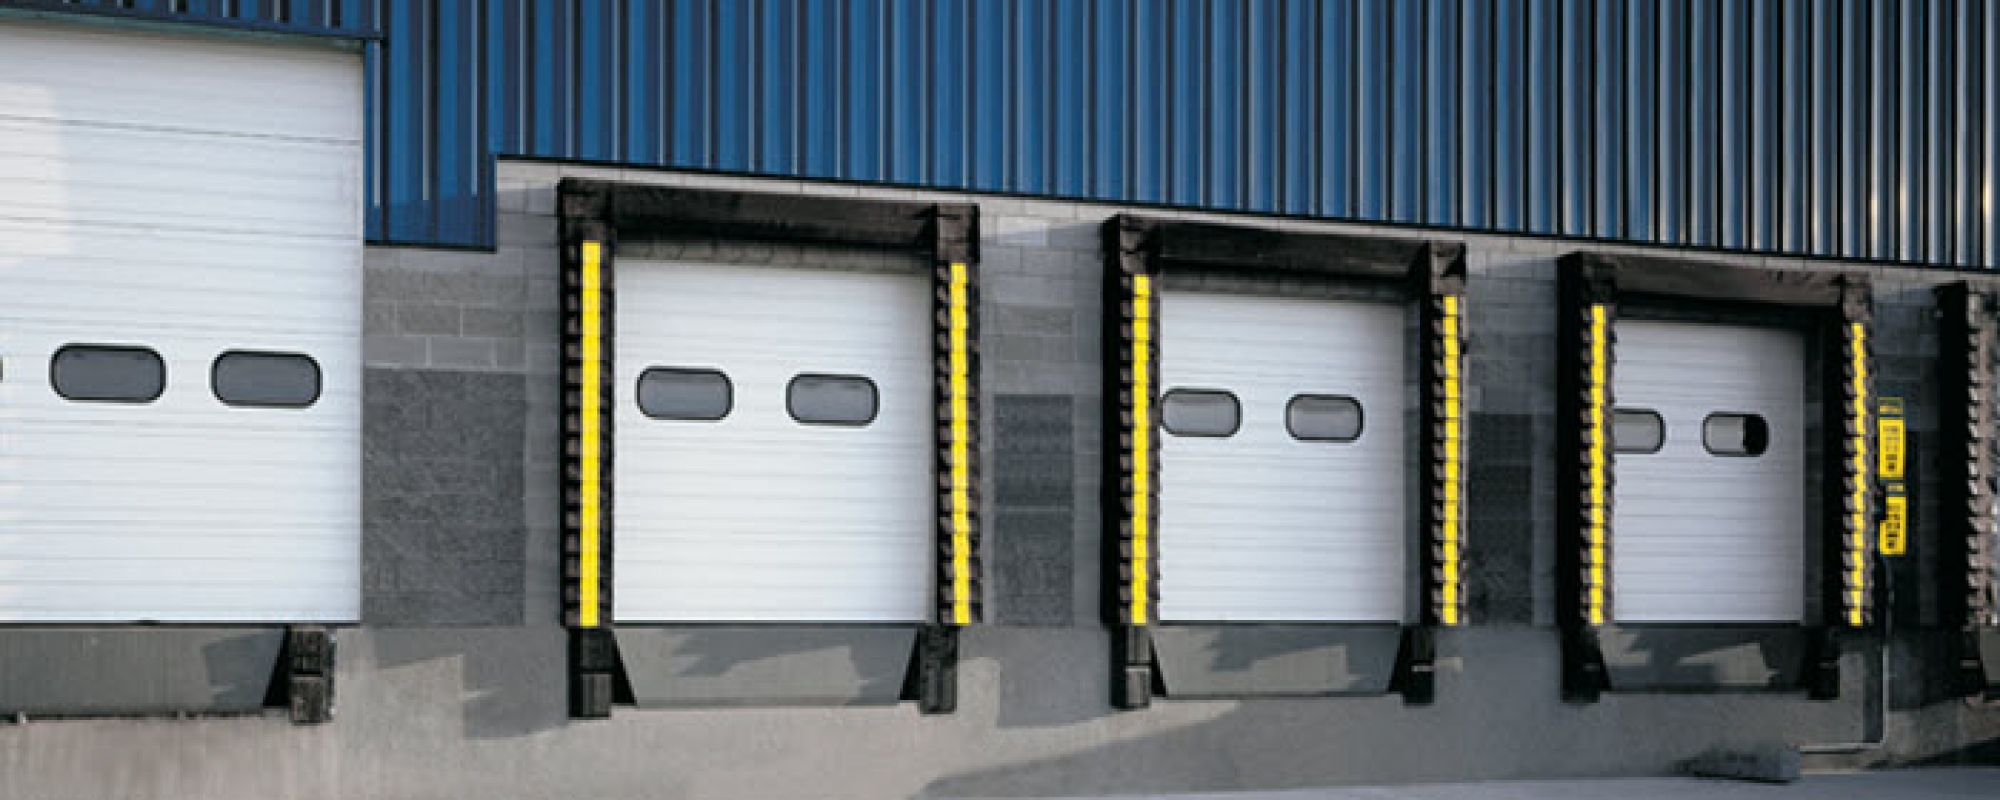 Loading Dock Doors, Shelters, Bumpers, Pit Levelers & More 